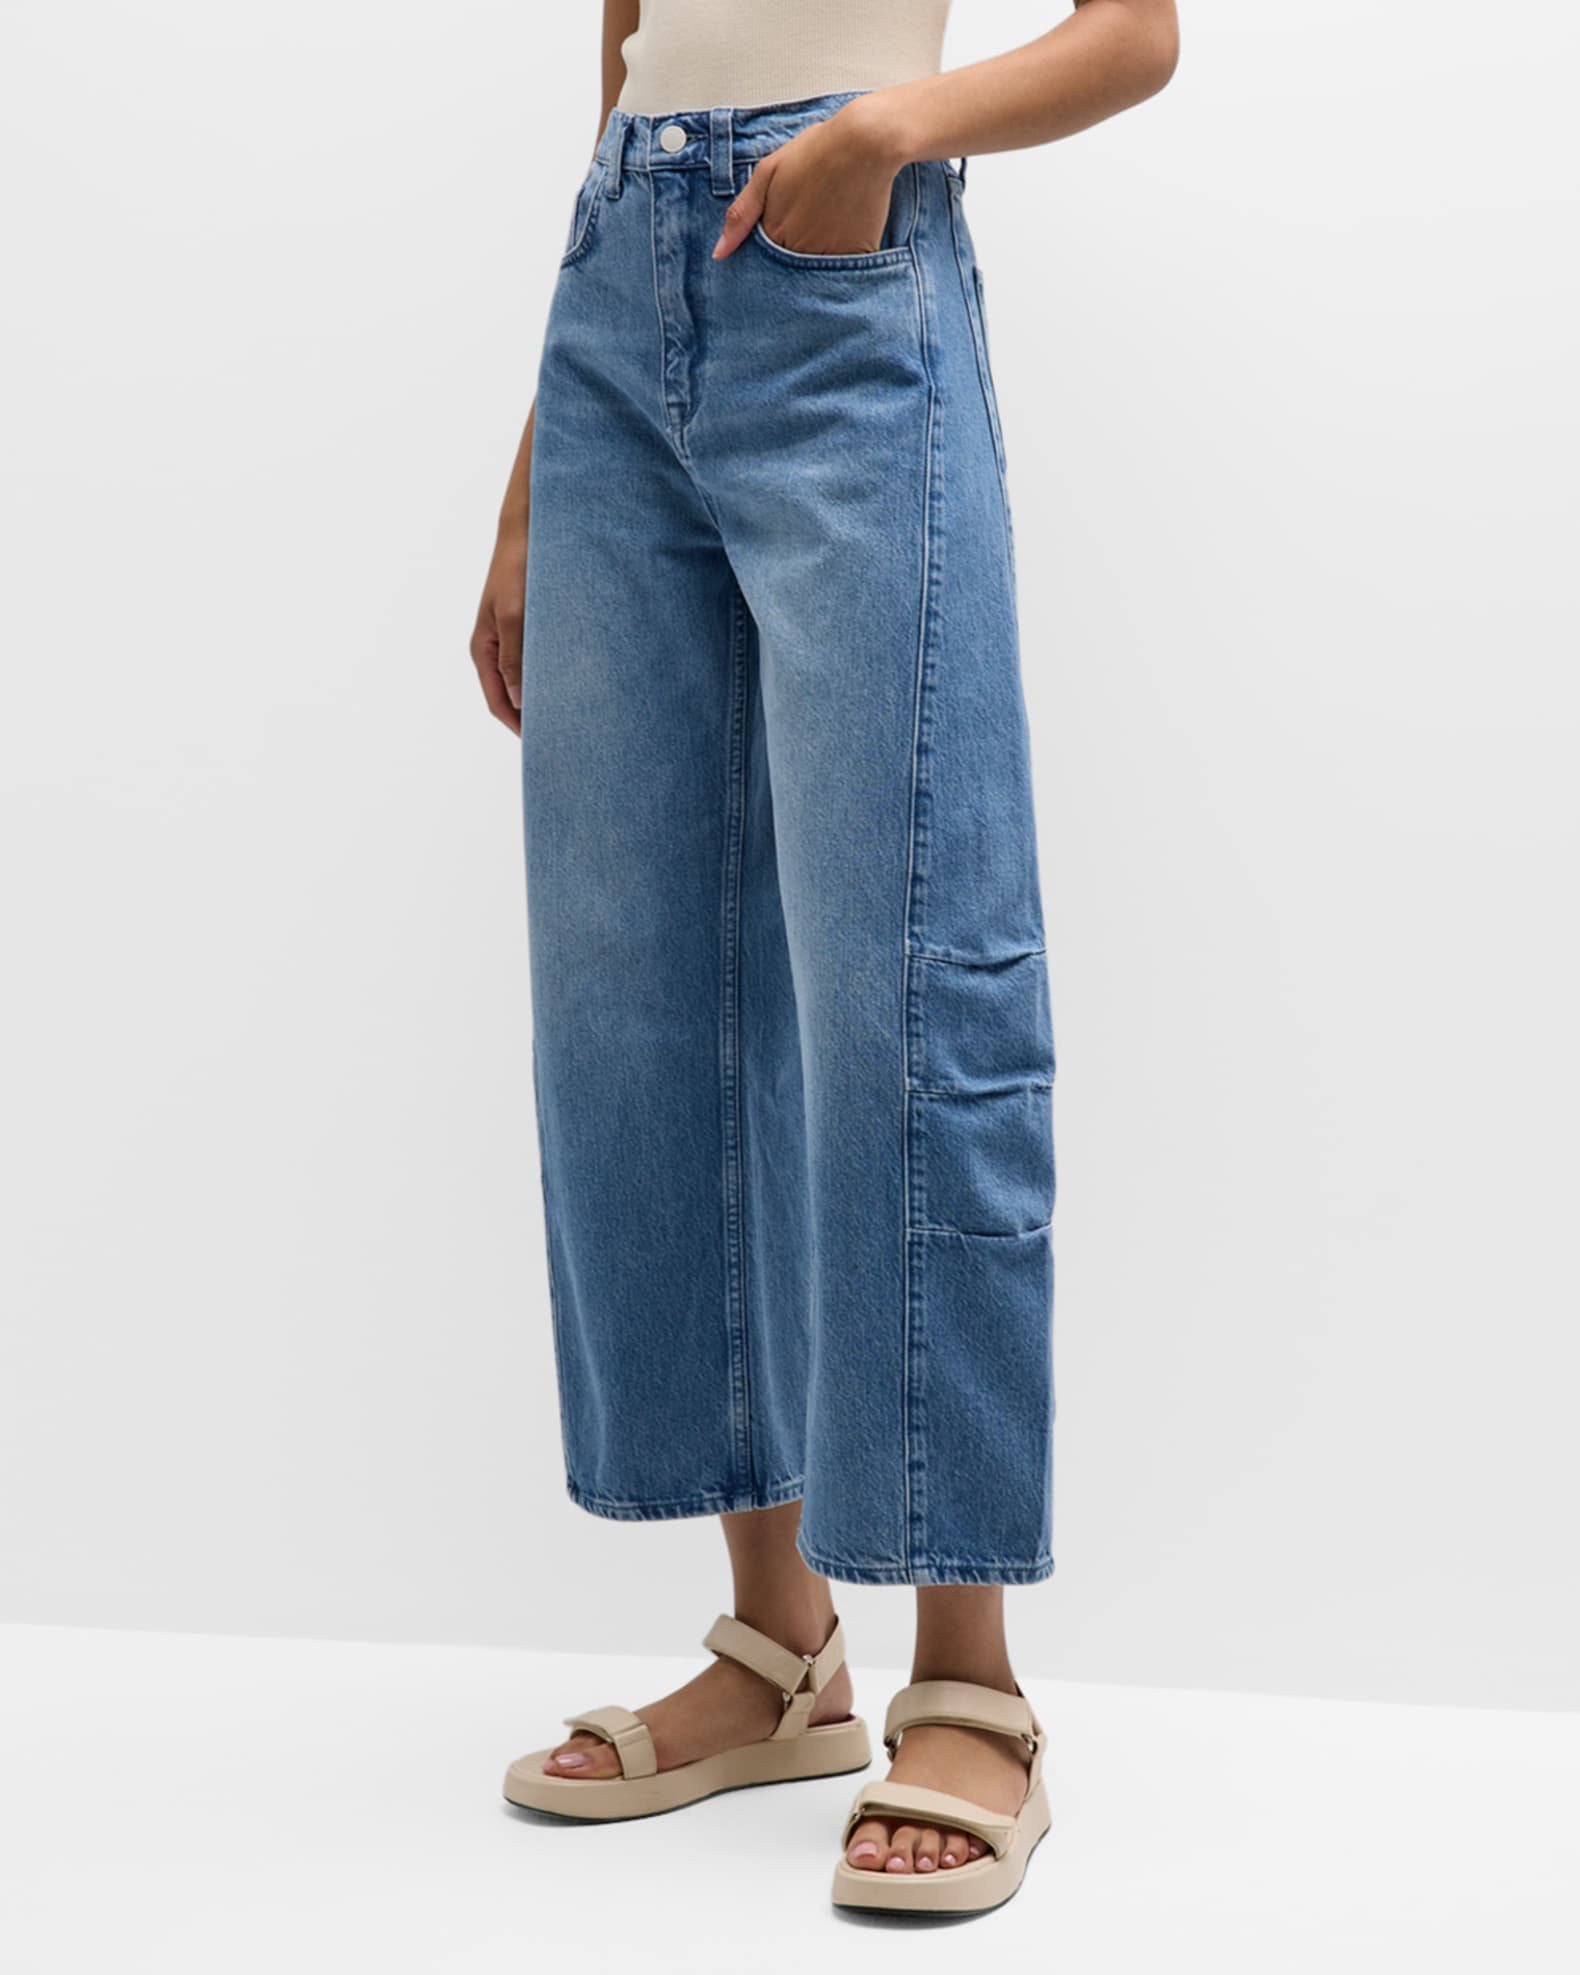 Triarchy Ms.Walker Mid-Rise Constructed Jeans | Neiman Marcus